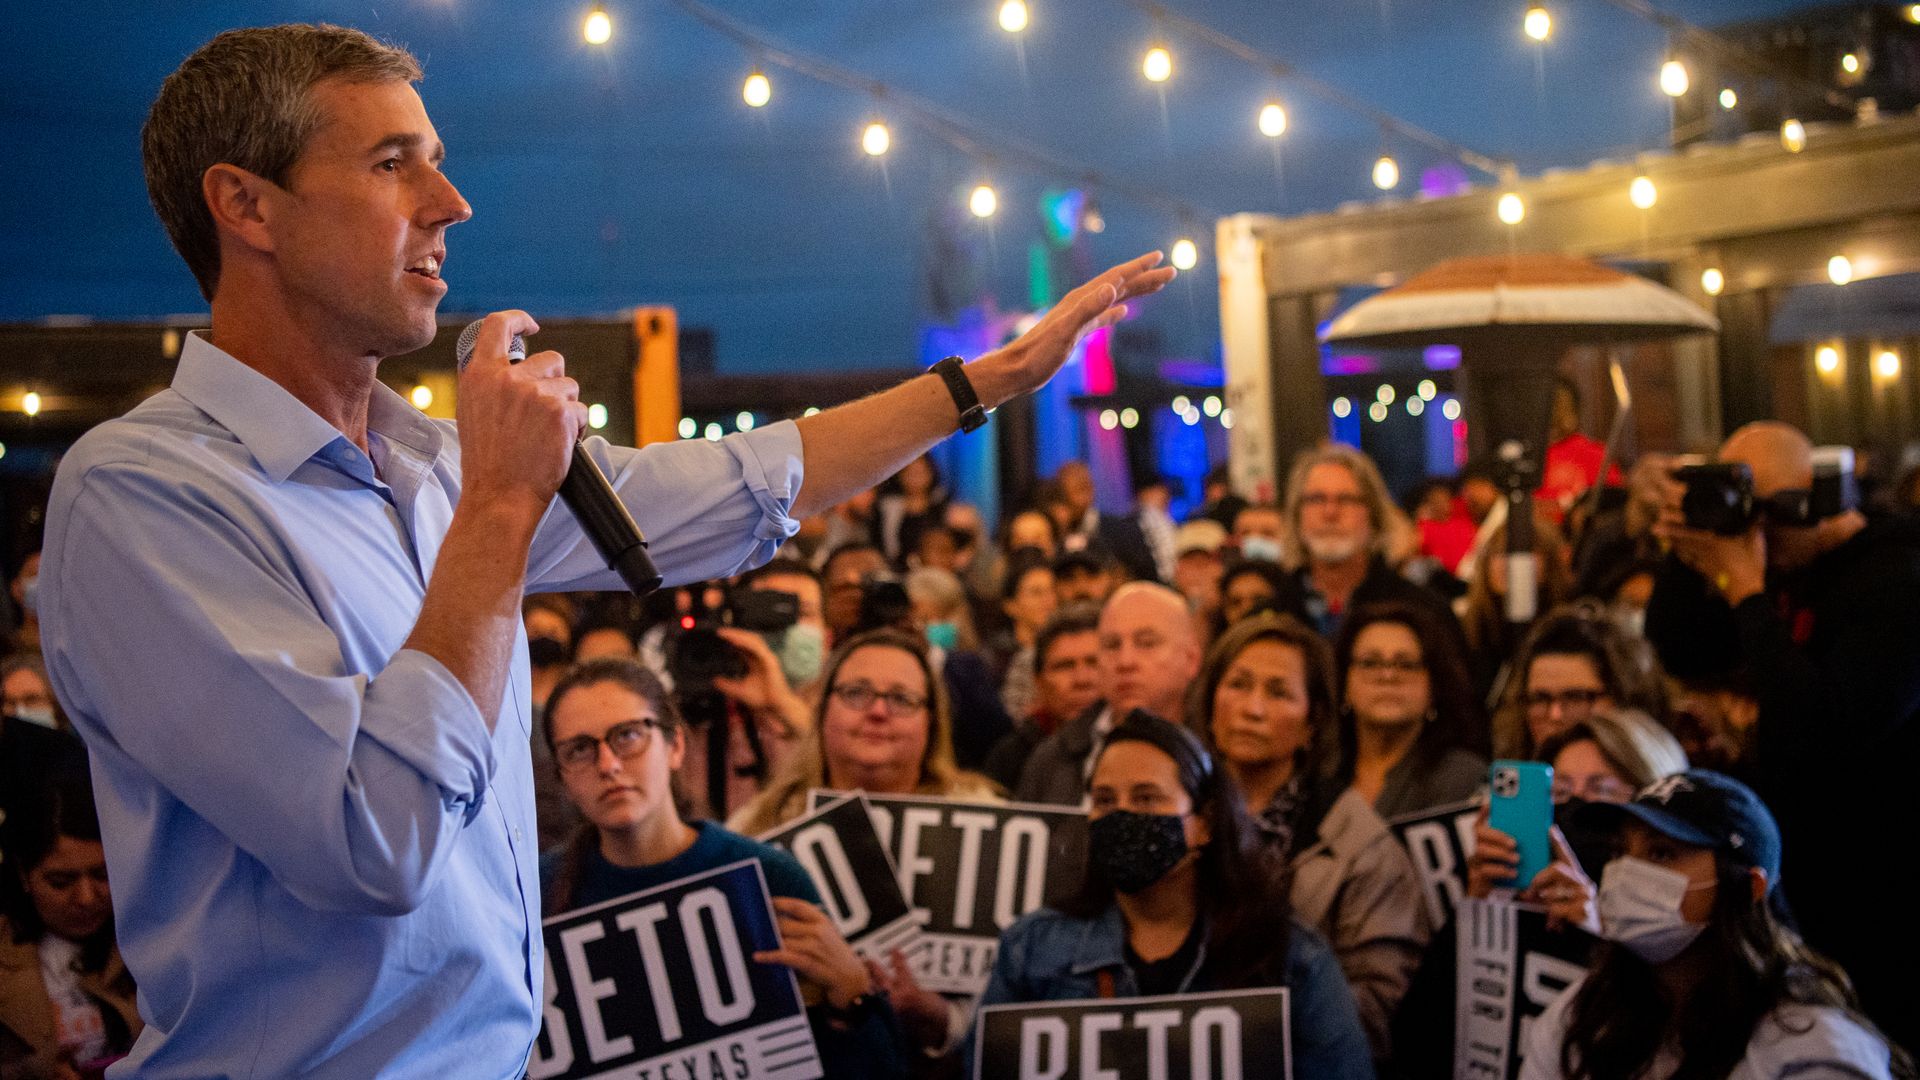 Beto talking to a rapt audience